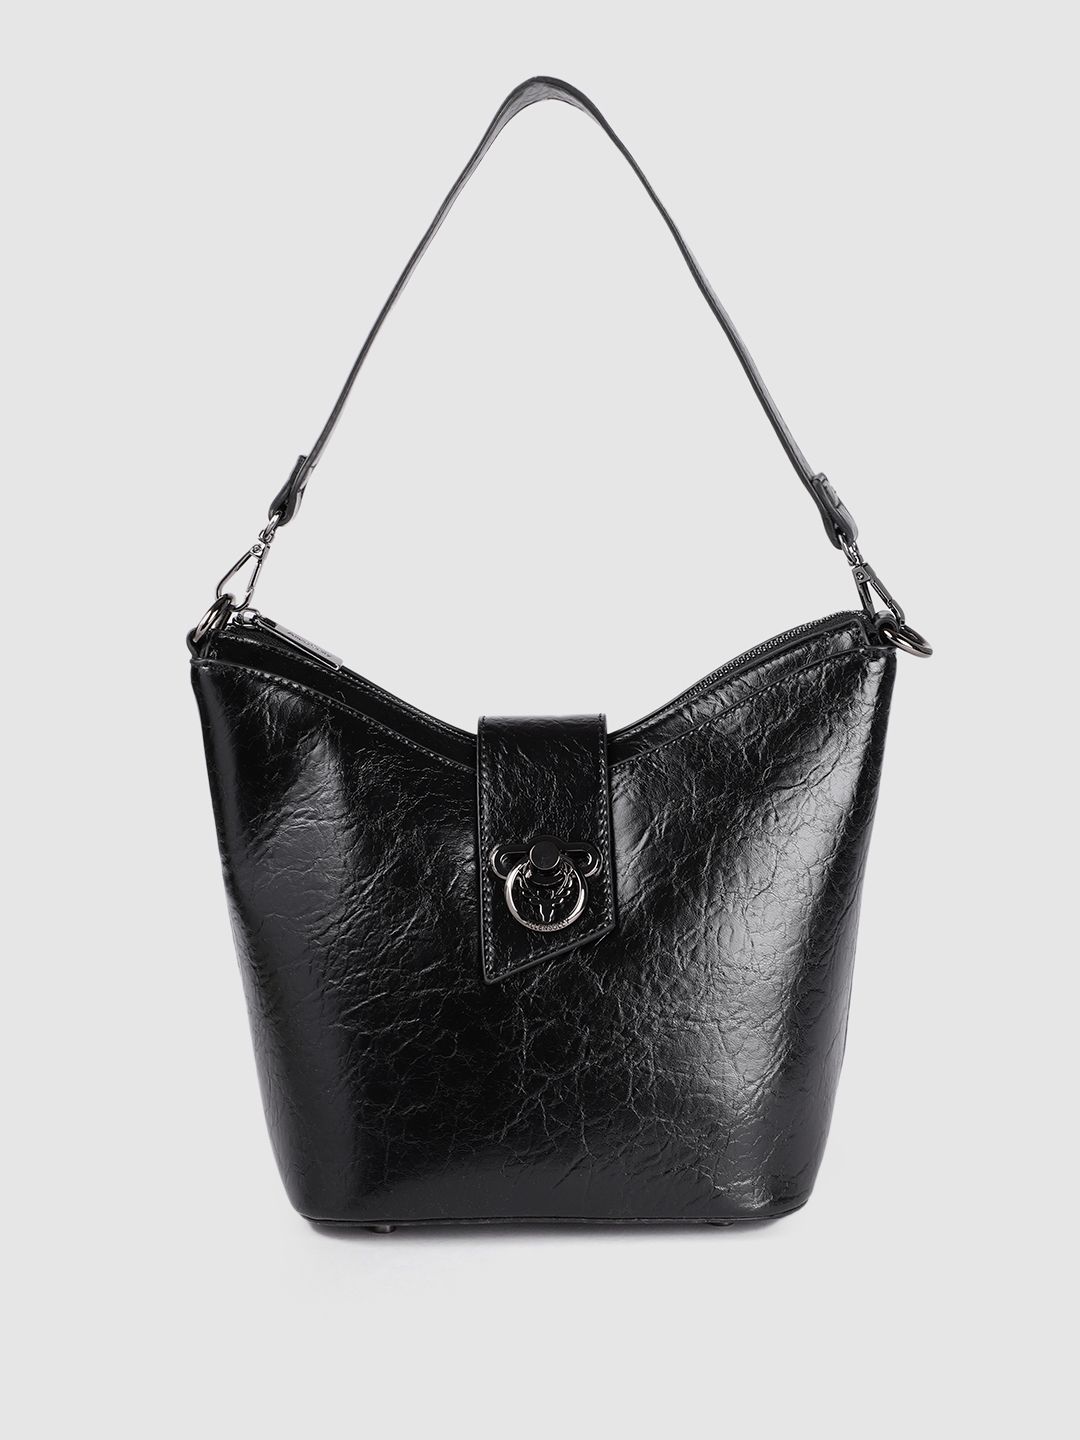 Allen Solly Black Textured Structured Hobo Bag Price in India